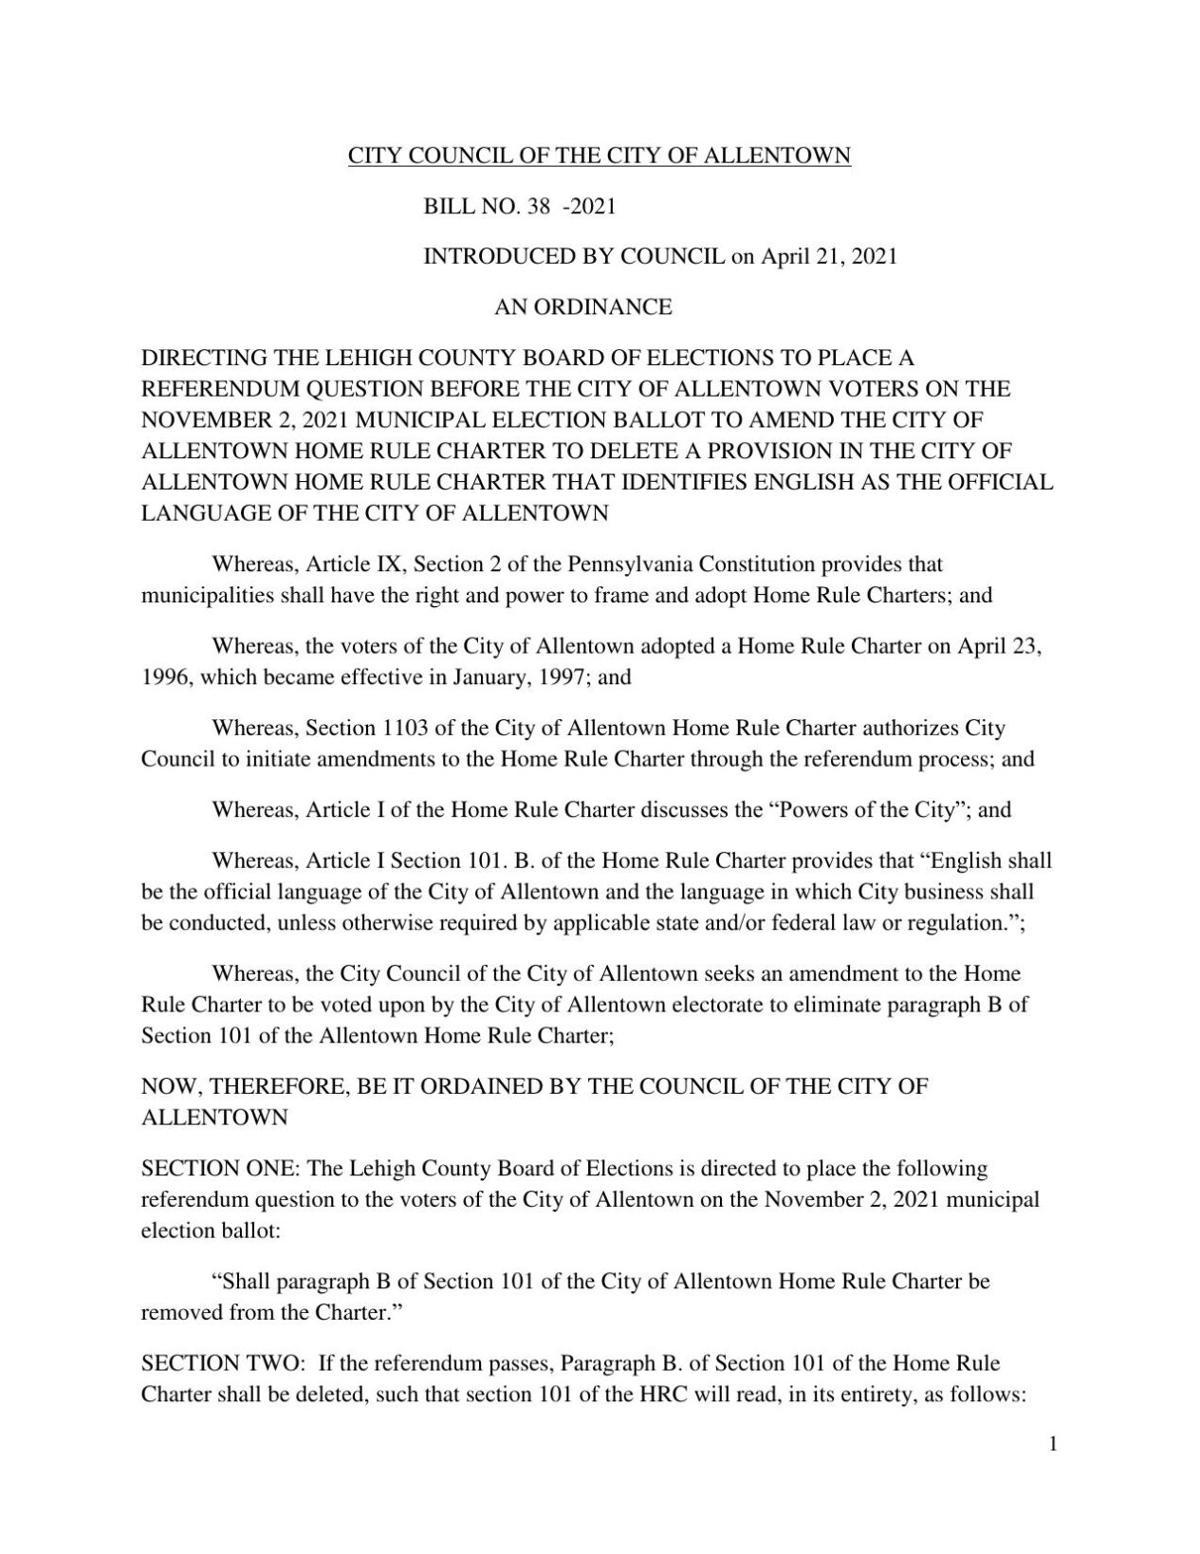 Allentown BILL NO. 38 -2021 Remove English as official language